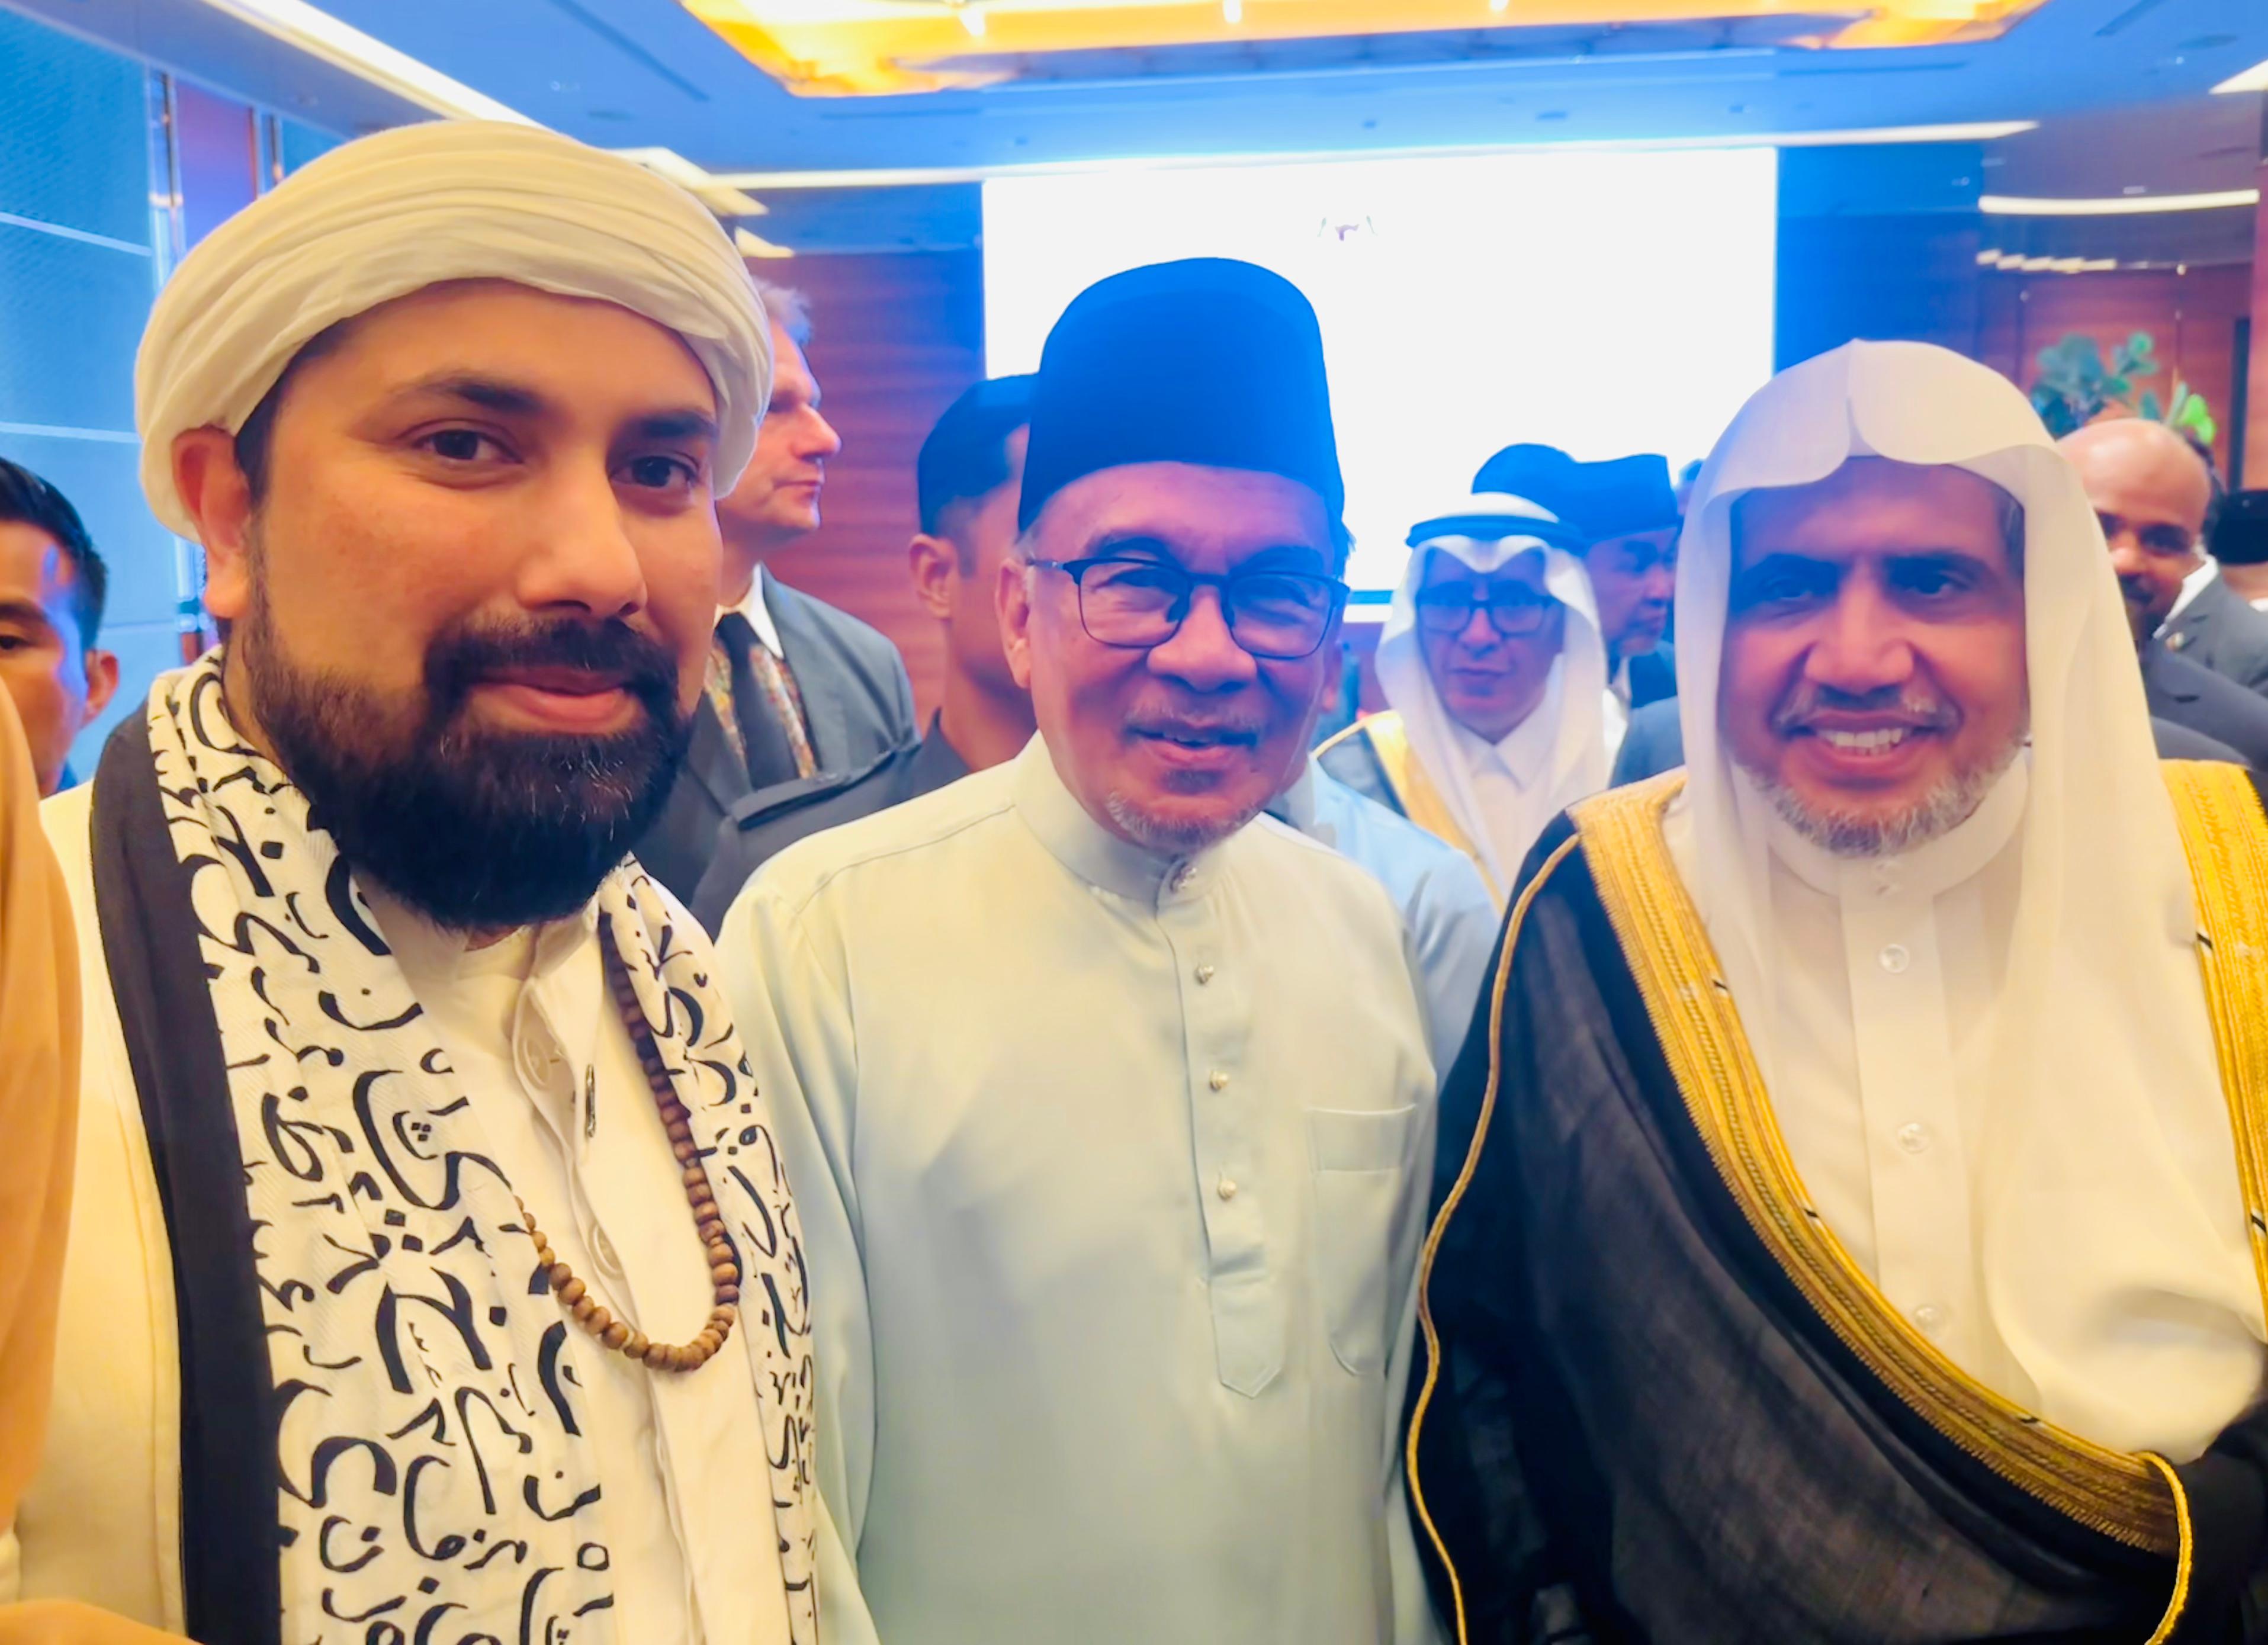 https://www.hindi.awazthevoice.in/upload/news/171525498306_2,000_religious_leaders_gathered_in_Malaysia,_Chishti,_Brahmeshanand_and_Singh_gave_India's_message_3.jfif